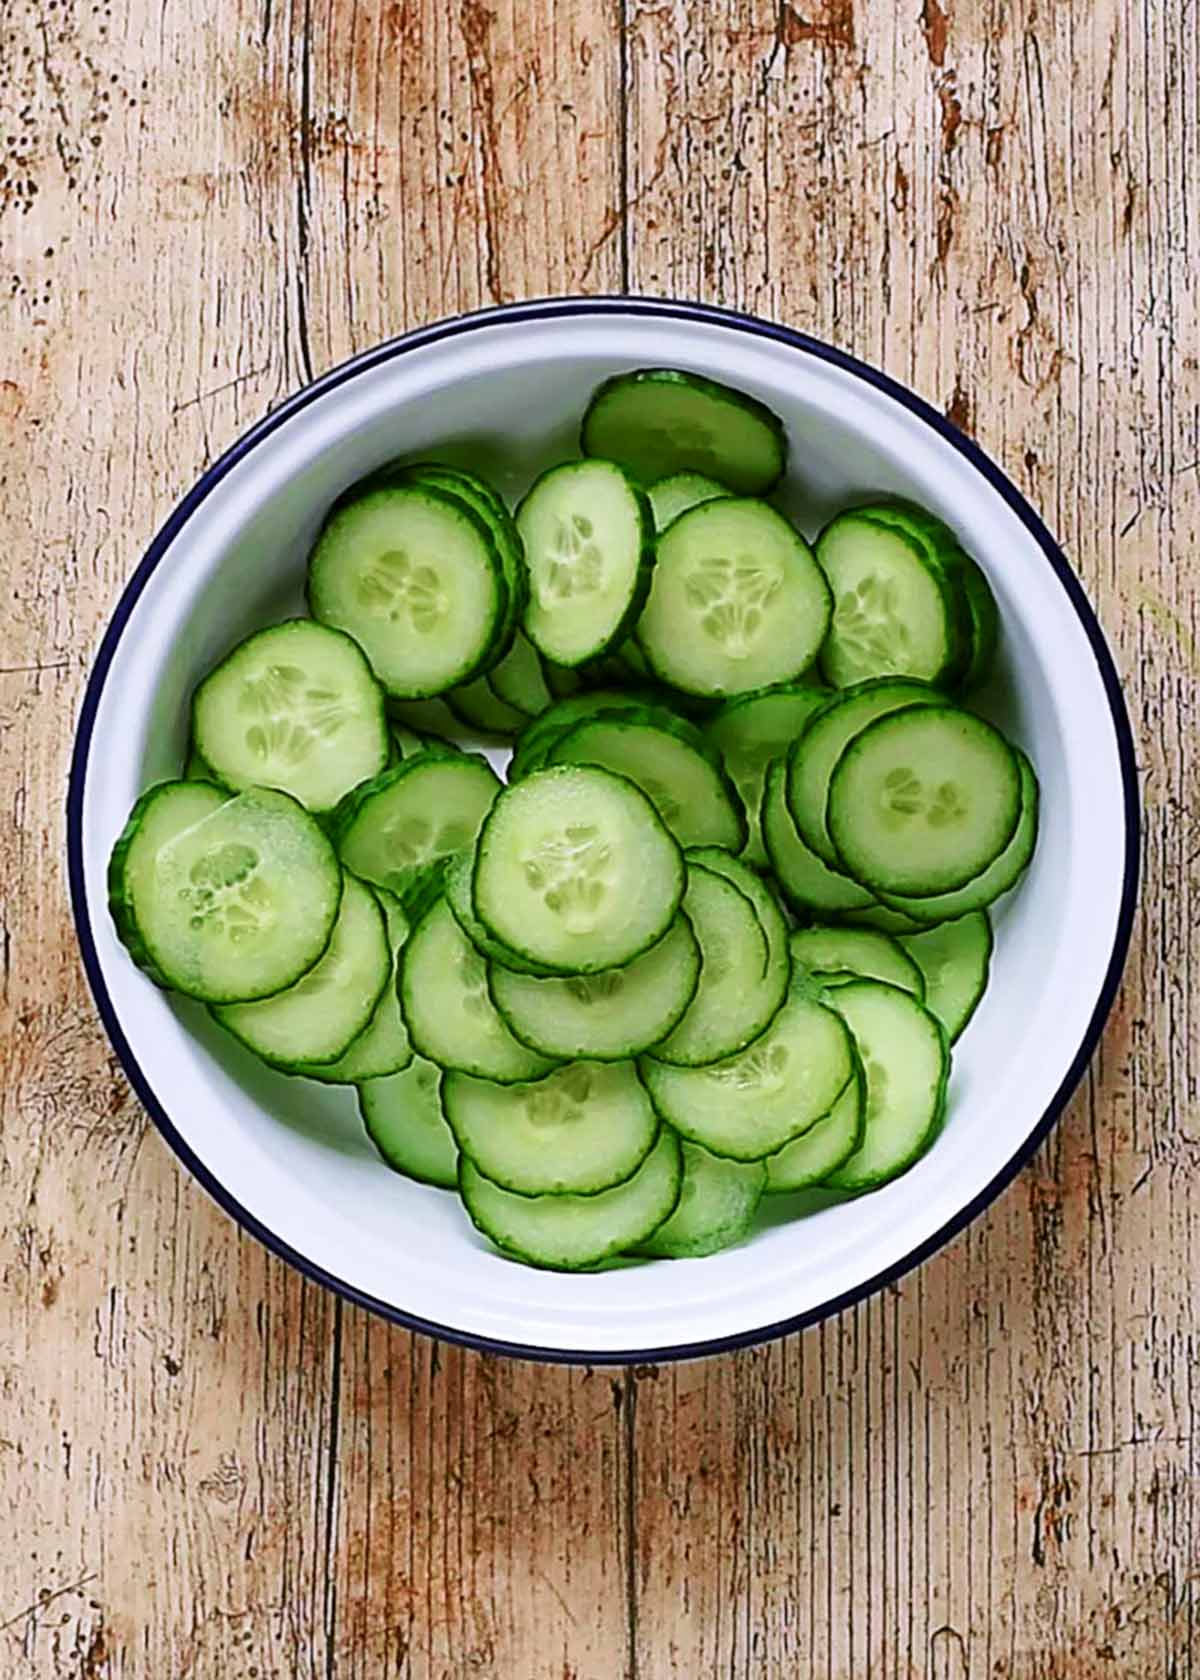 Cucumber slices in an enamel bowl.